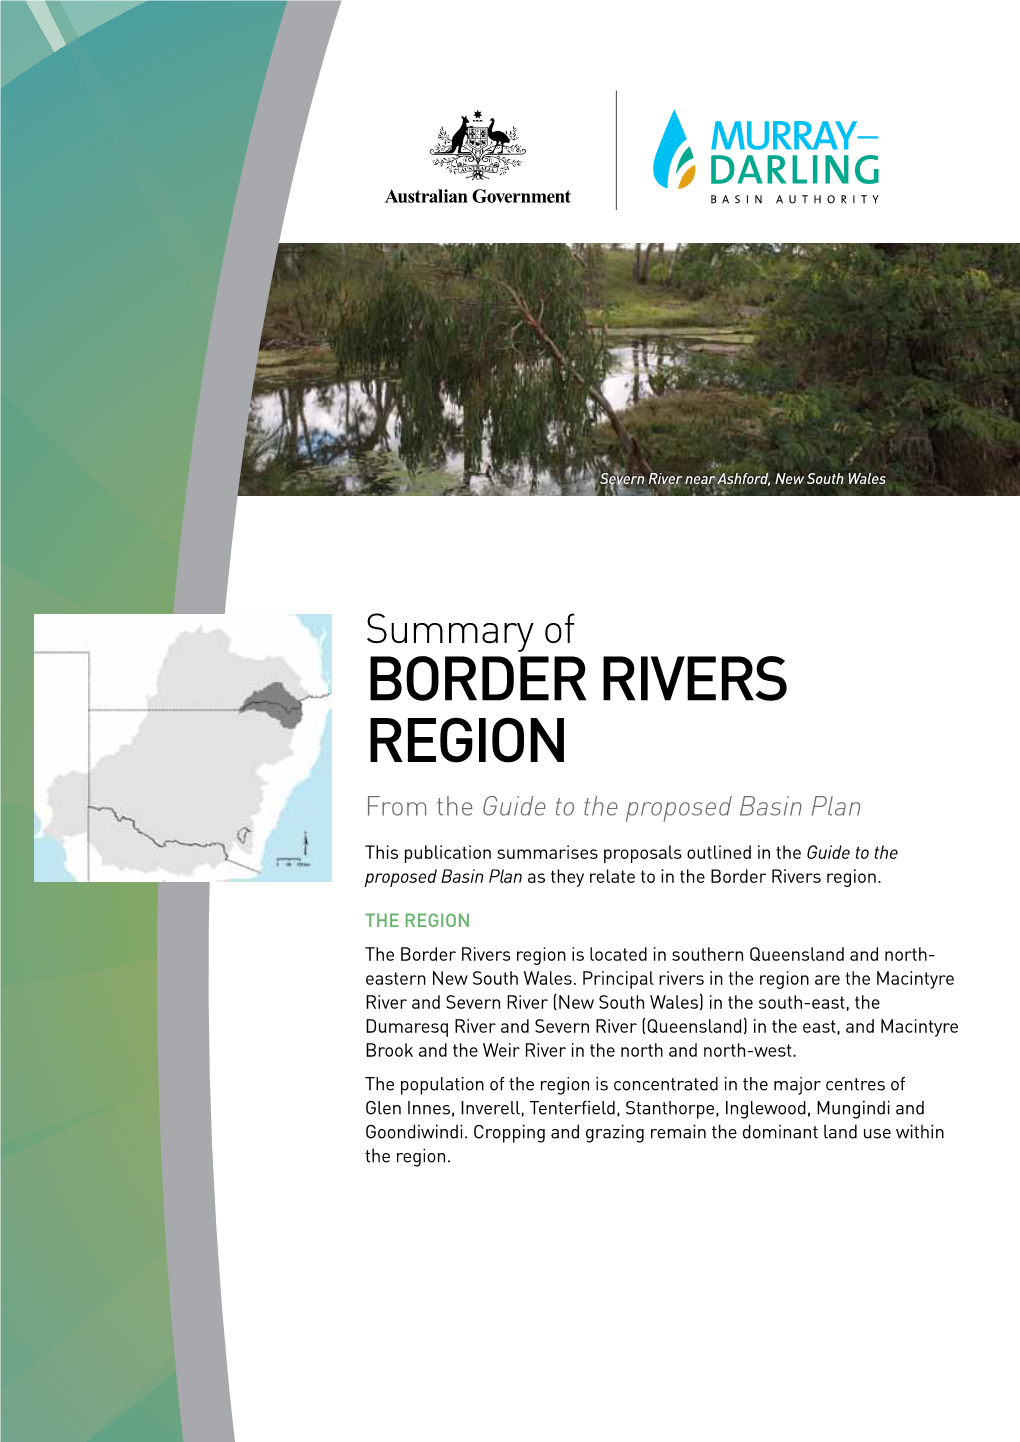 BORDER RIVERS REGION from the Guide to the Proposed Basin Plan